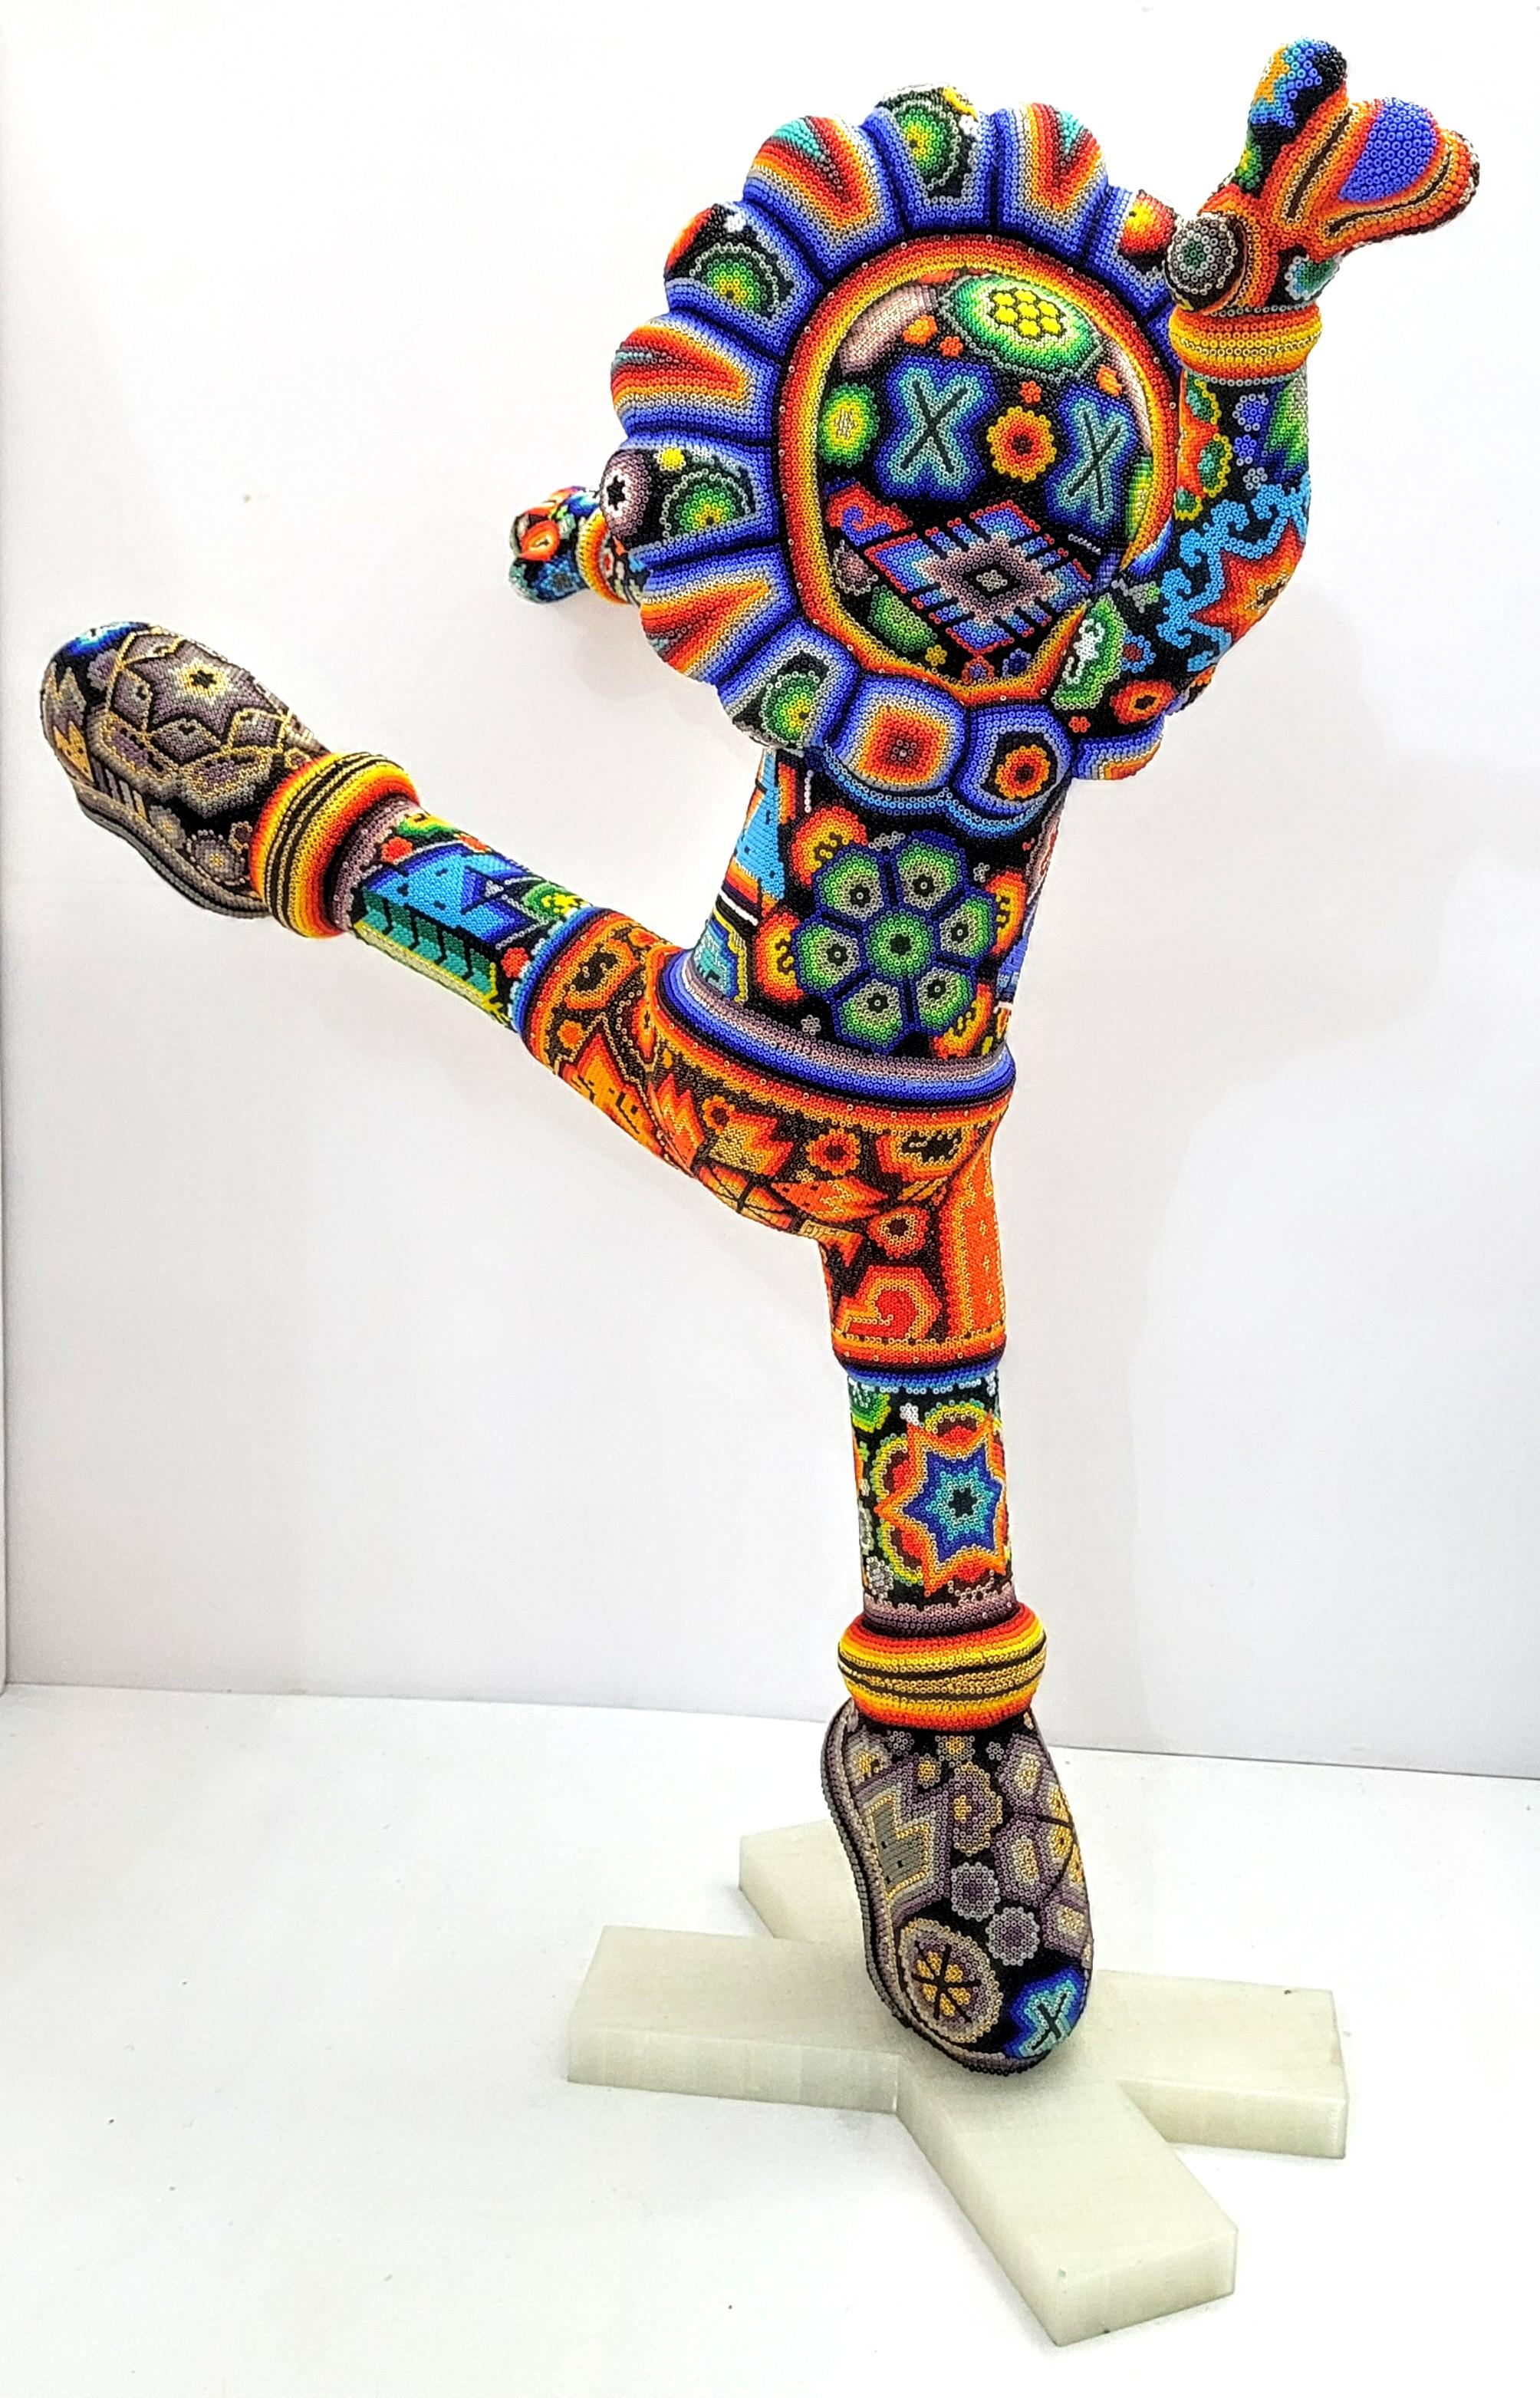 On Point from Dance Huichol Series - Sculpture by CHROMA aka Rick Wolfryd 